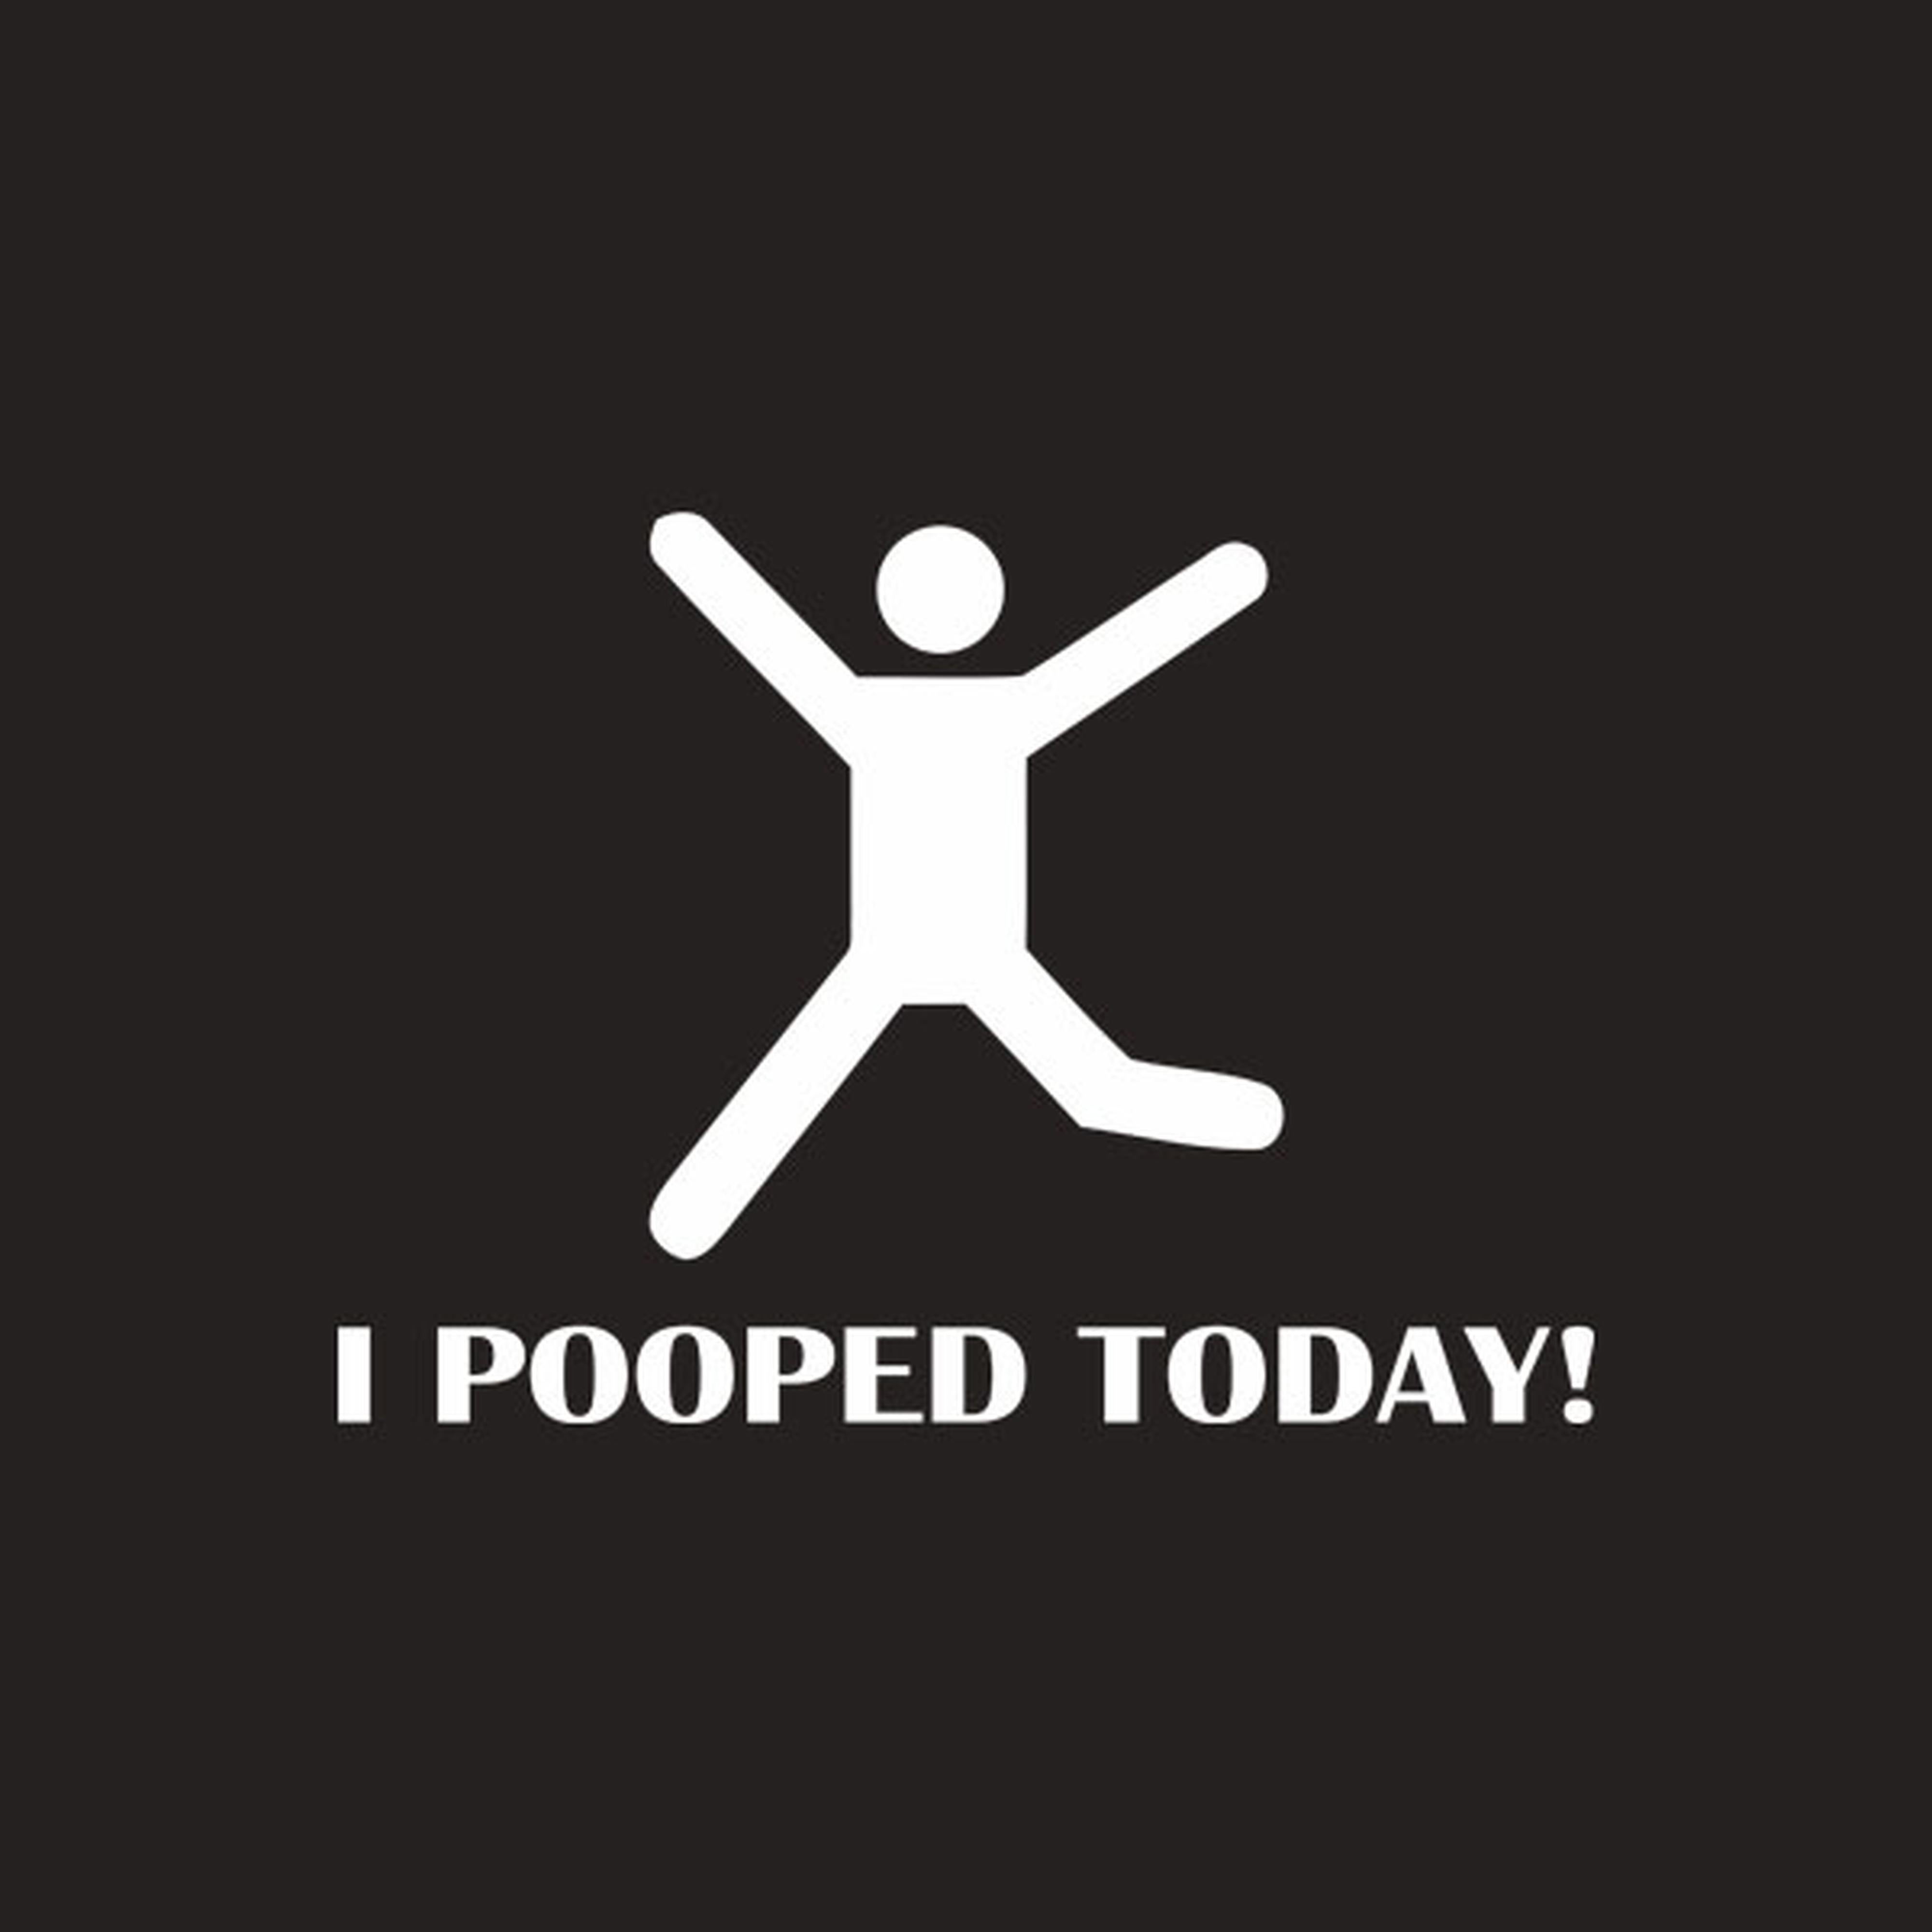 I pooped today - T-shirt